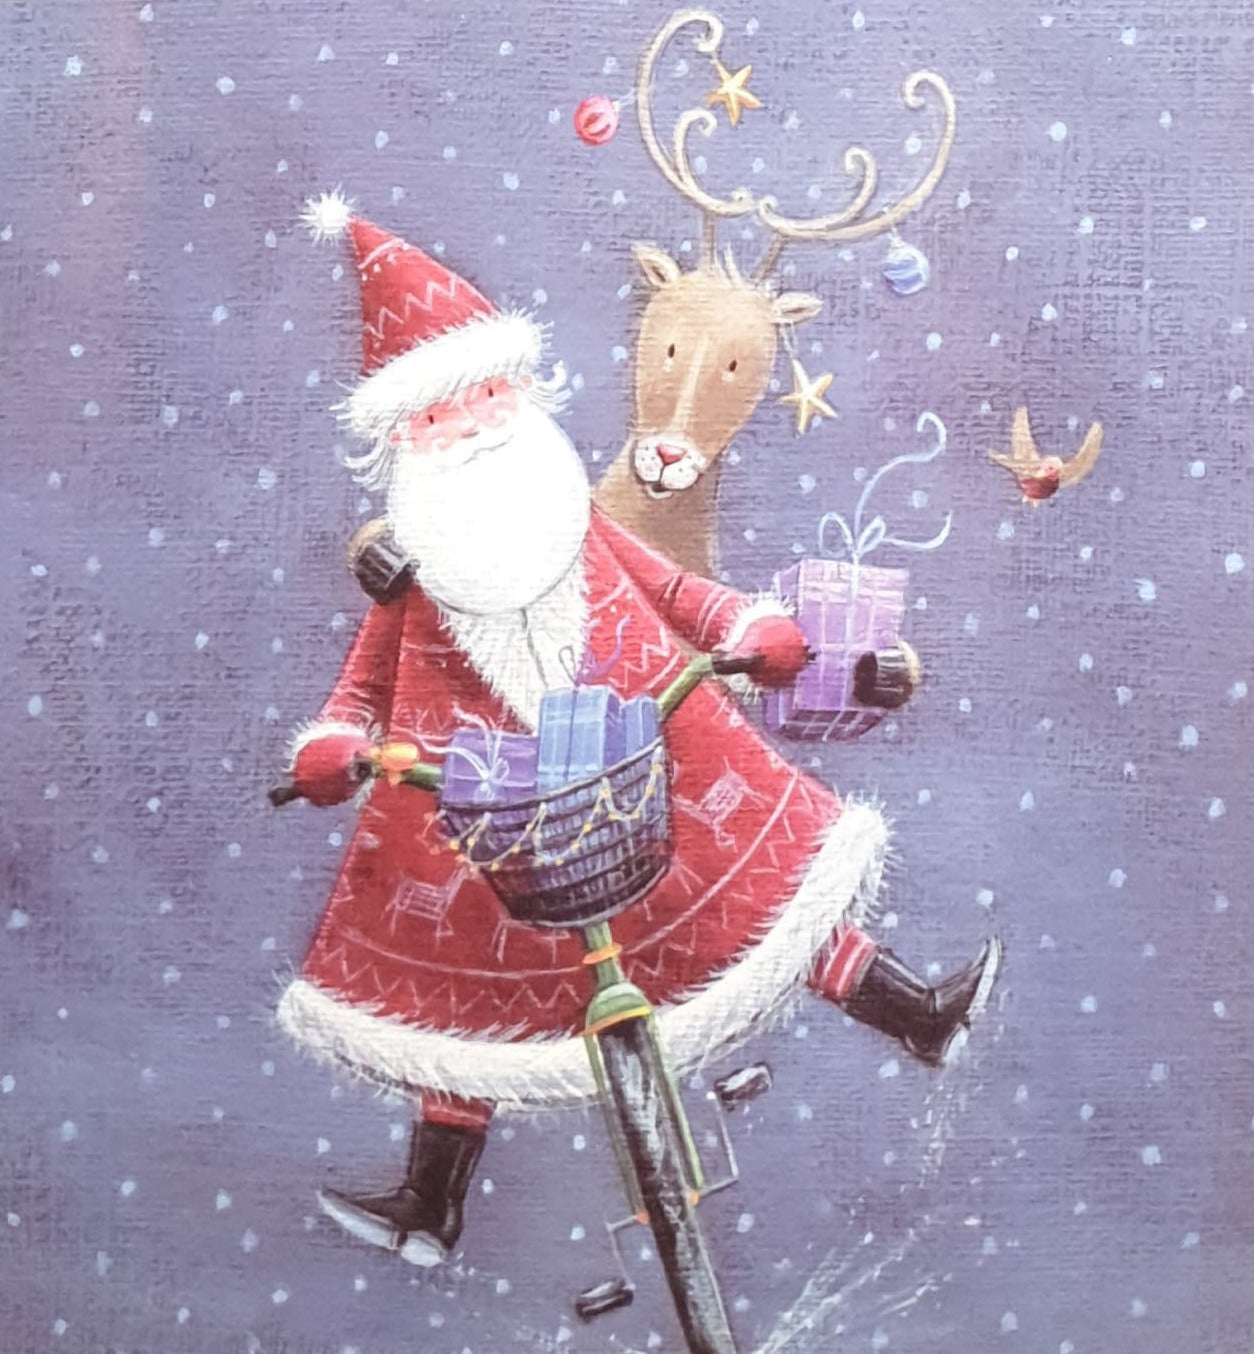 Charity Christmas Cards - Pack of 8 / Down Syndrome Ireland - Santa & Rudolph on Bike